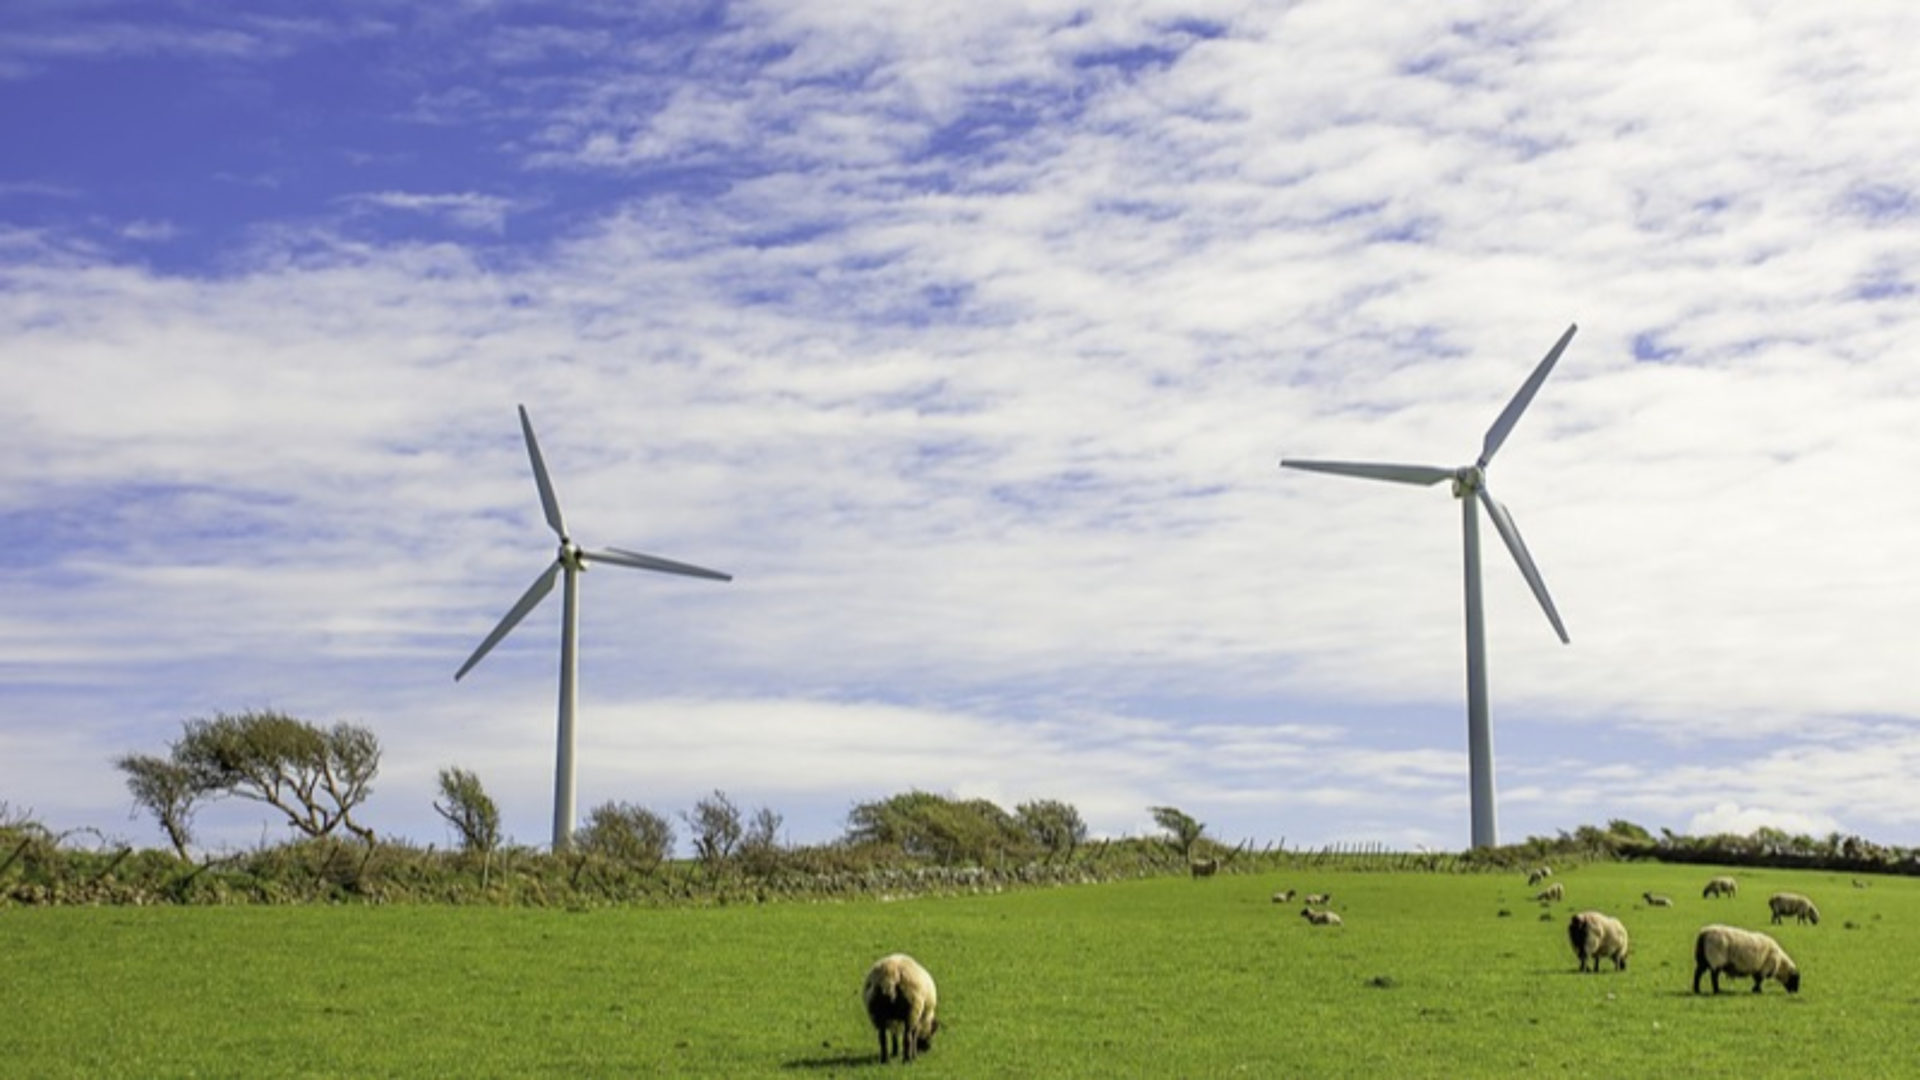 Government decarbonisation plans - A green field with sheep and wind turbines. Blue sky above with clouds.